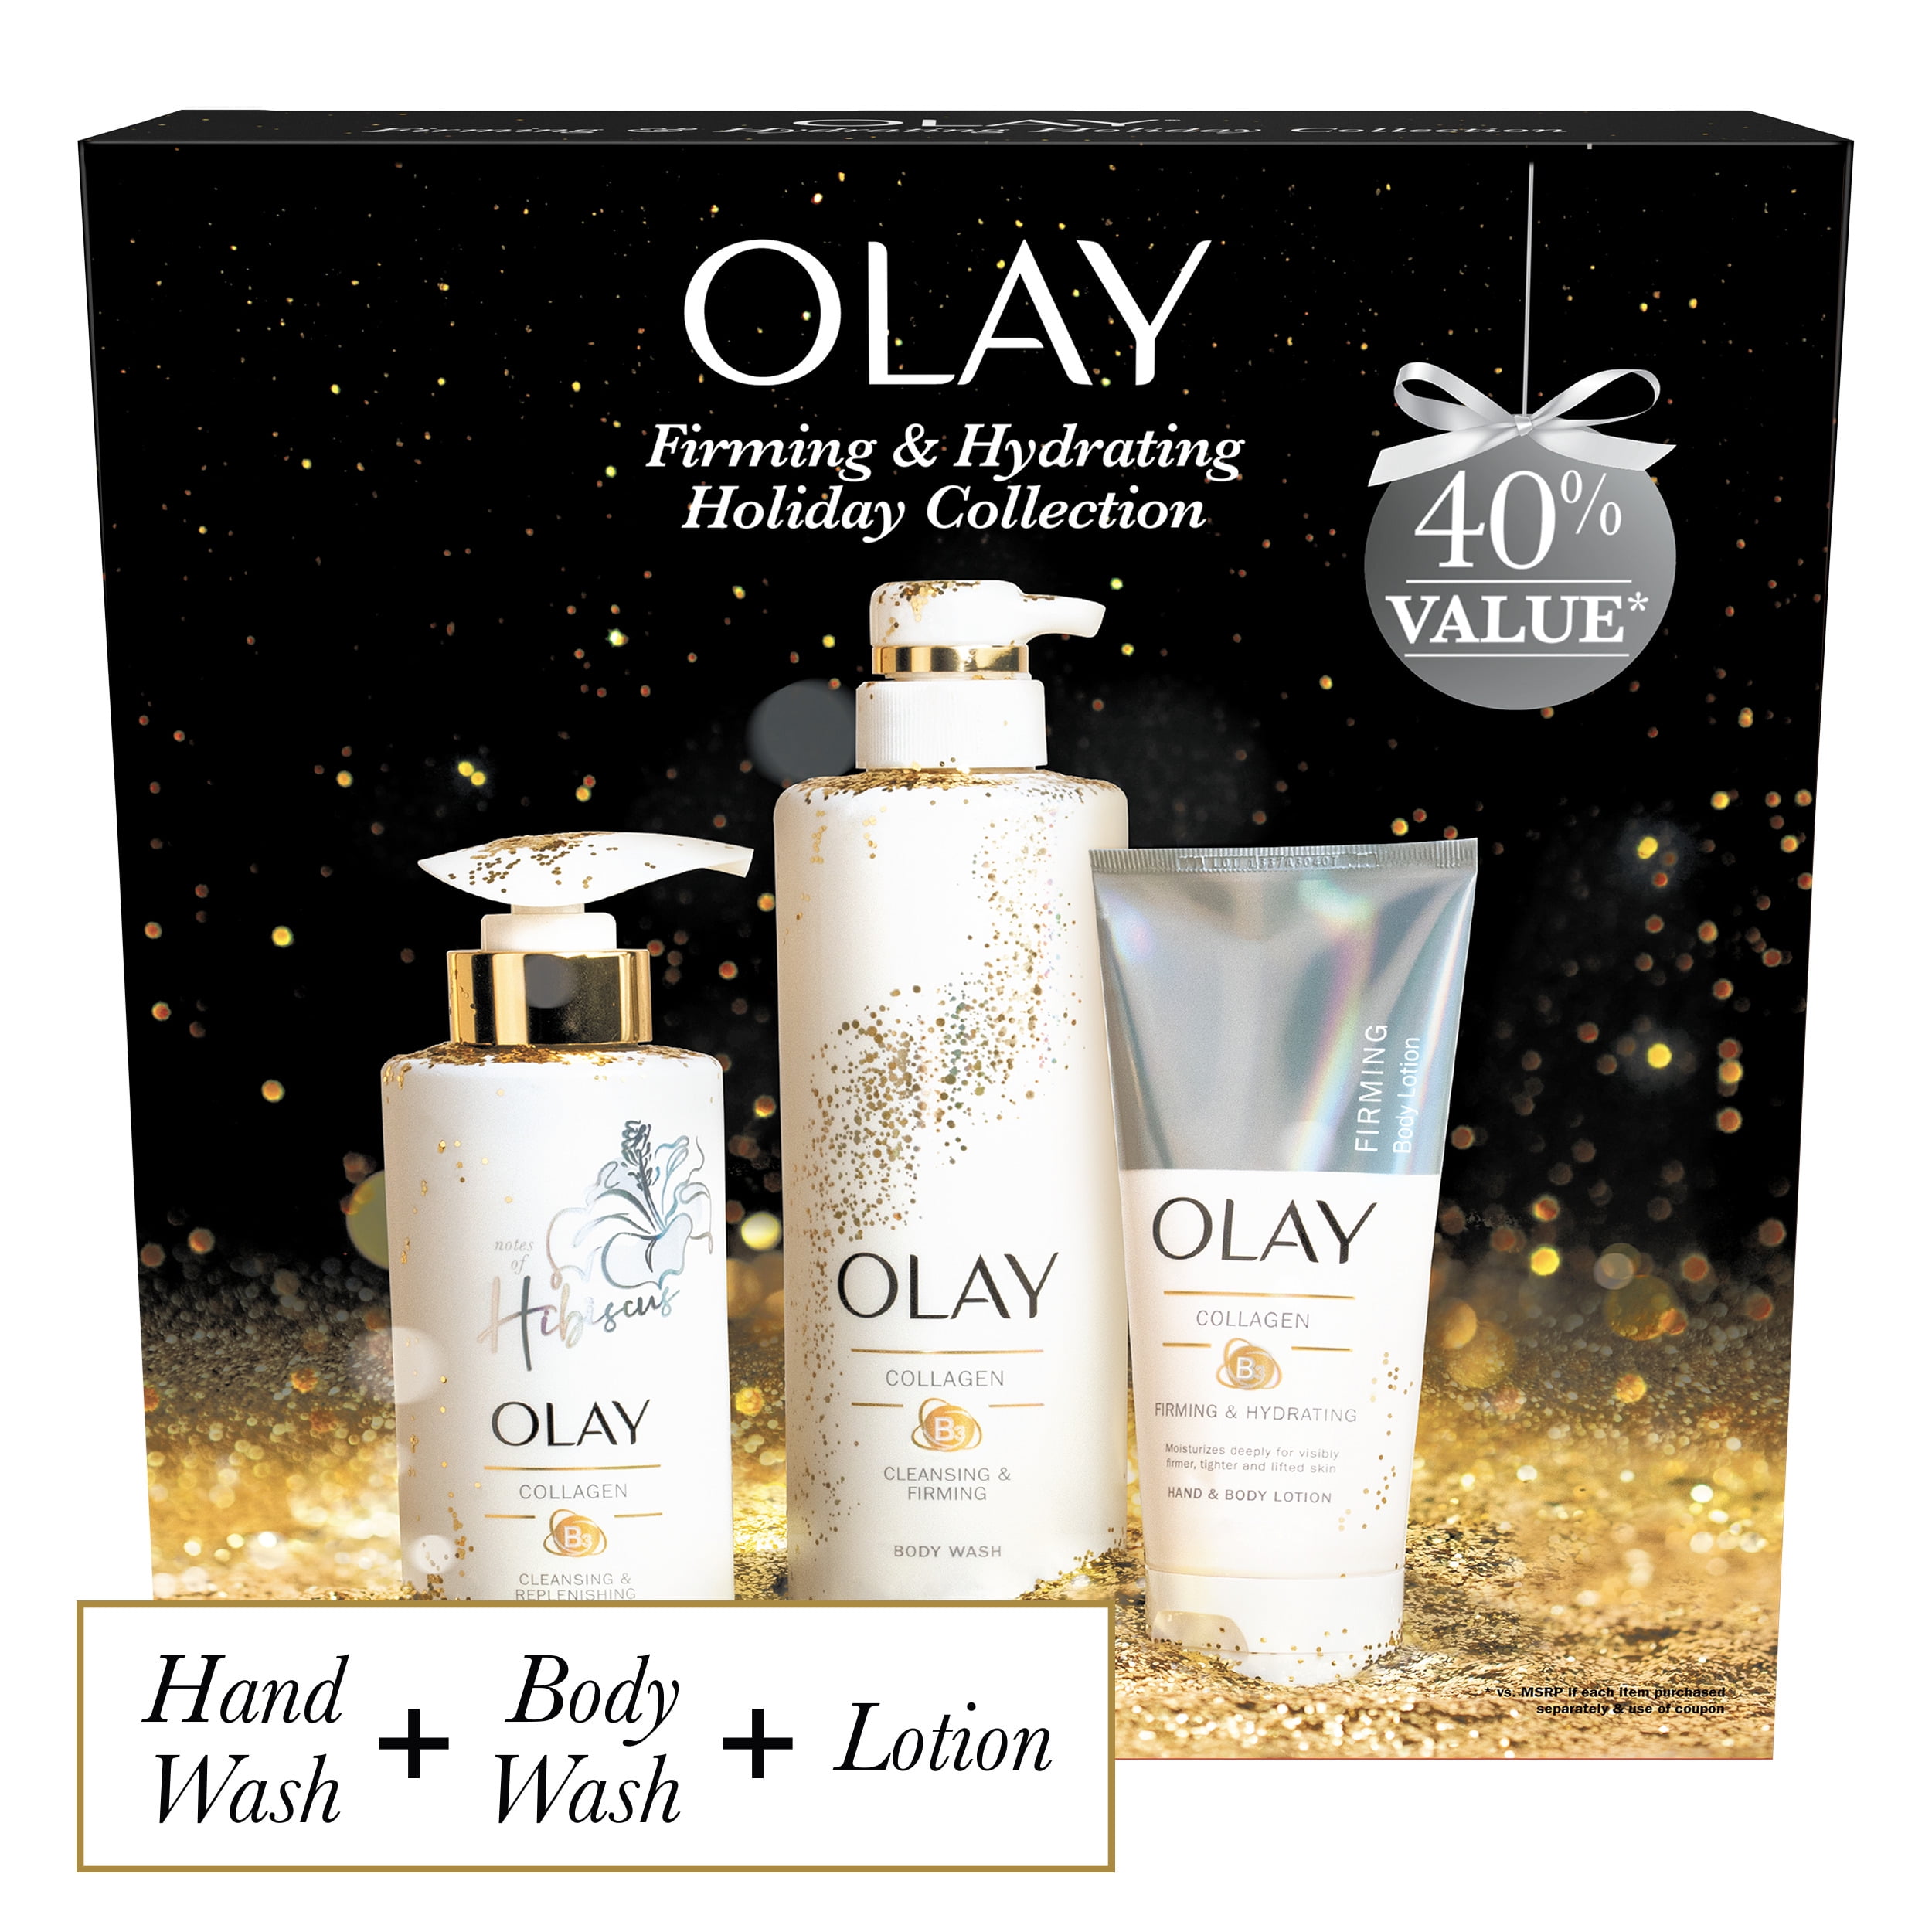 40-value-olay-holiday-gift-set-with-collagen-body-wash-17-9-oz-collagen-hand-and-body